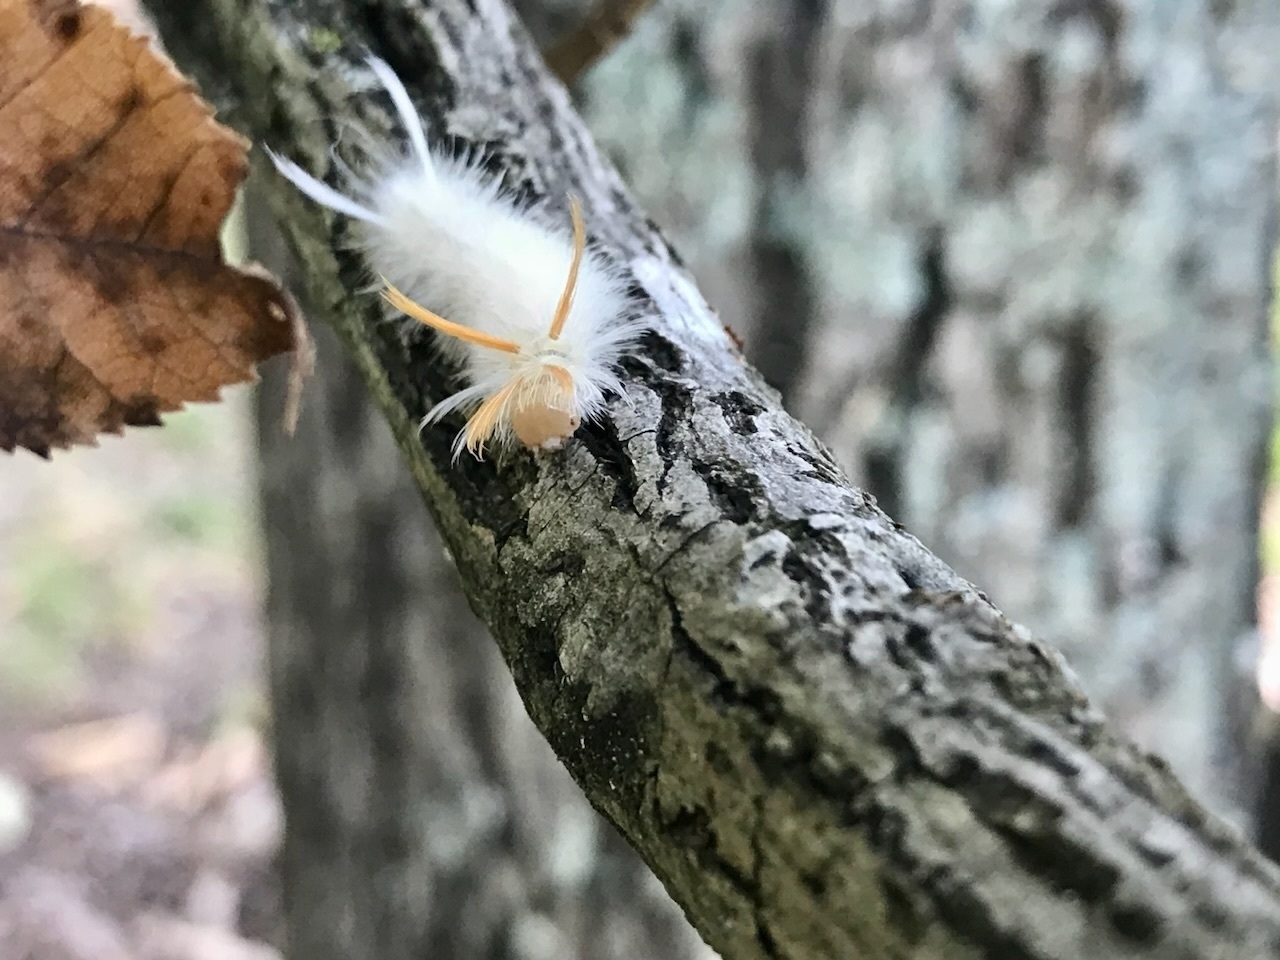 A furry white caterpillar with light orange eyes and orange tufts near the head